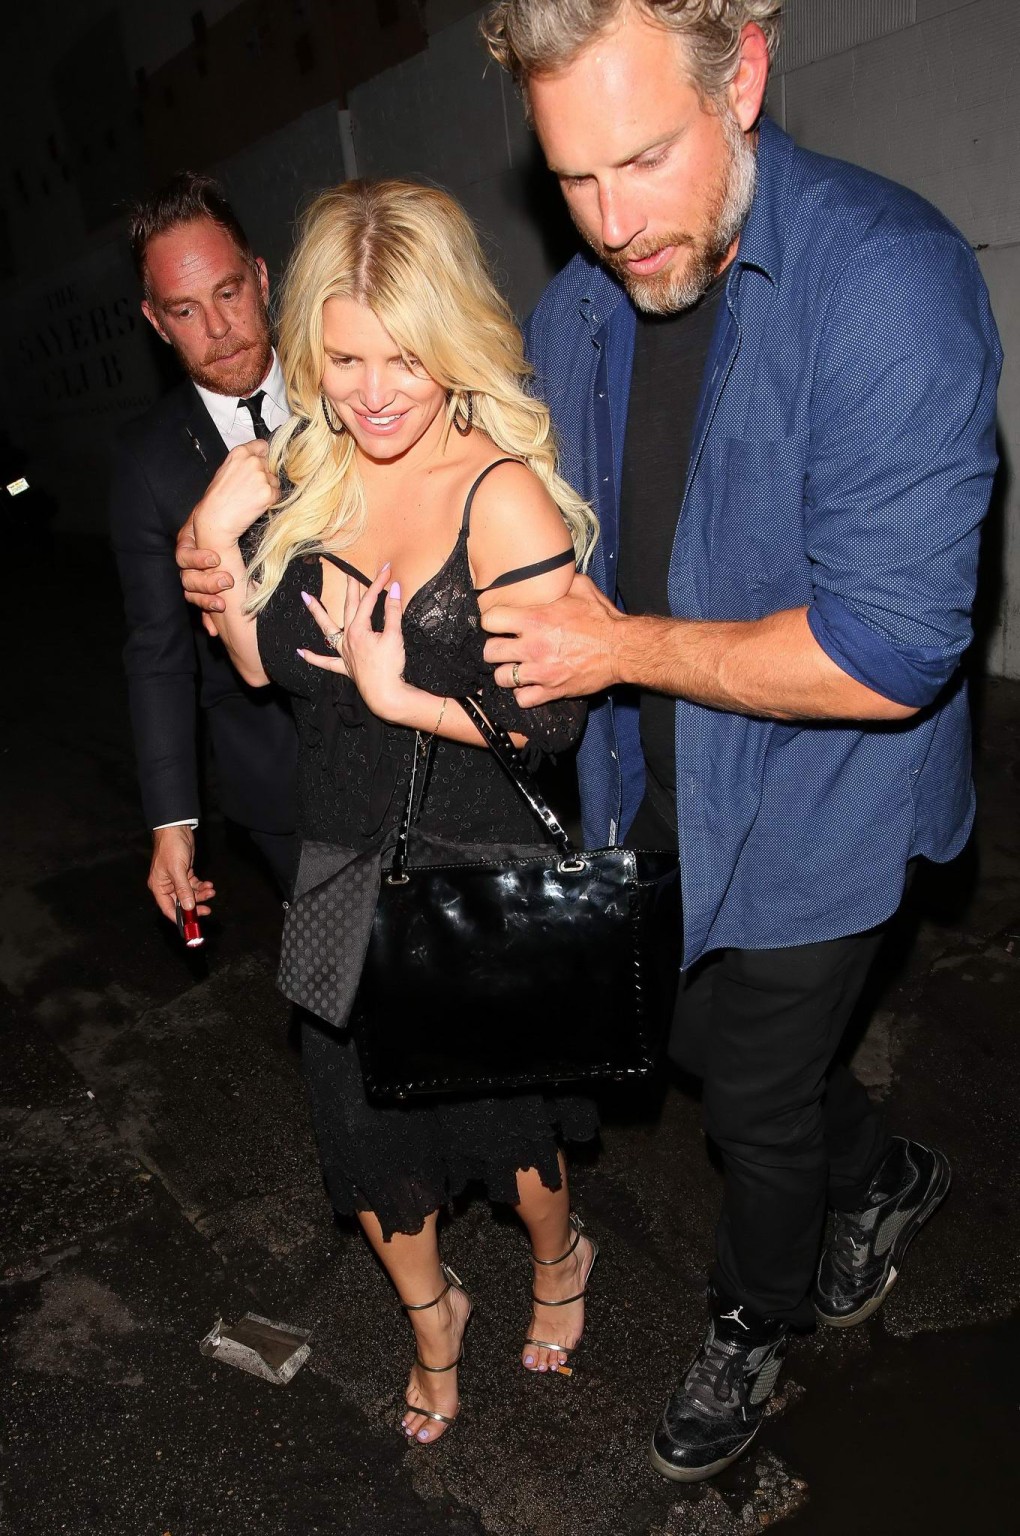 Jessica simpson wardrobe malfunction while stumbling out of sayers club in holly
 #75162402